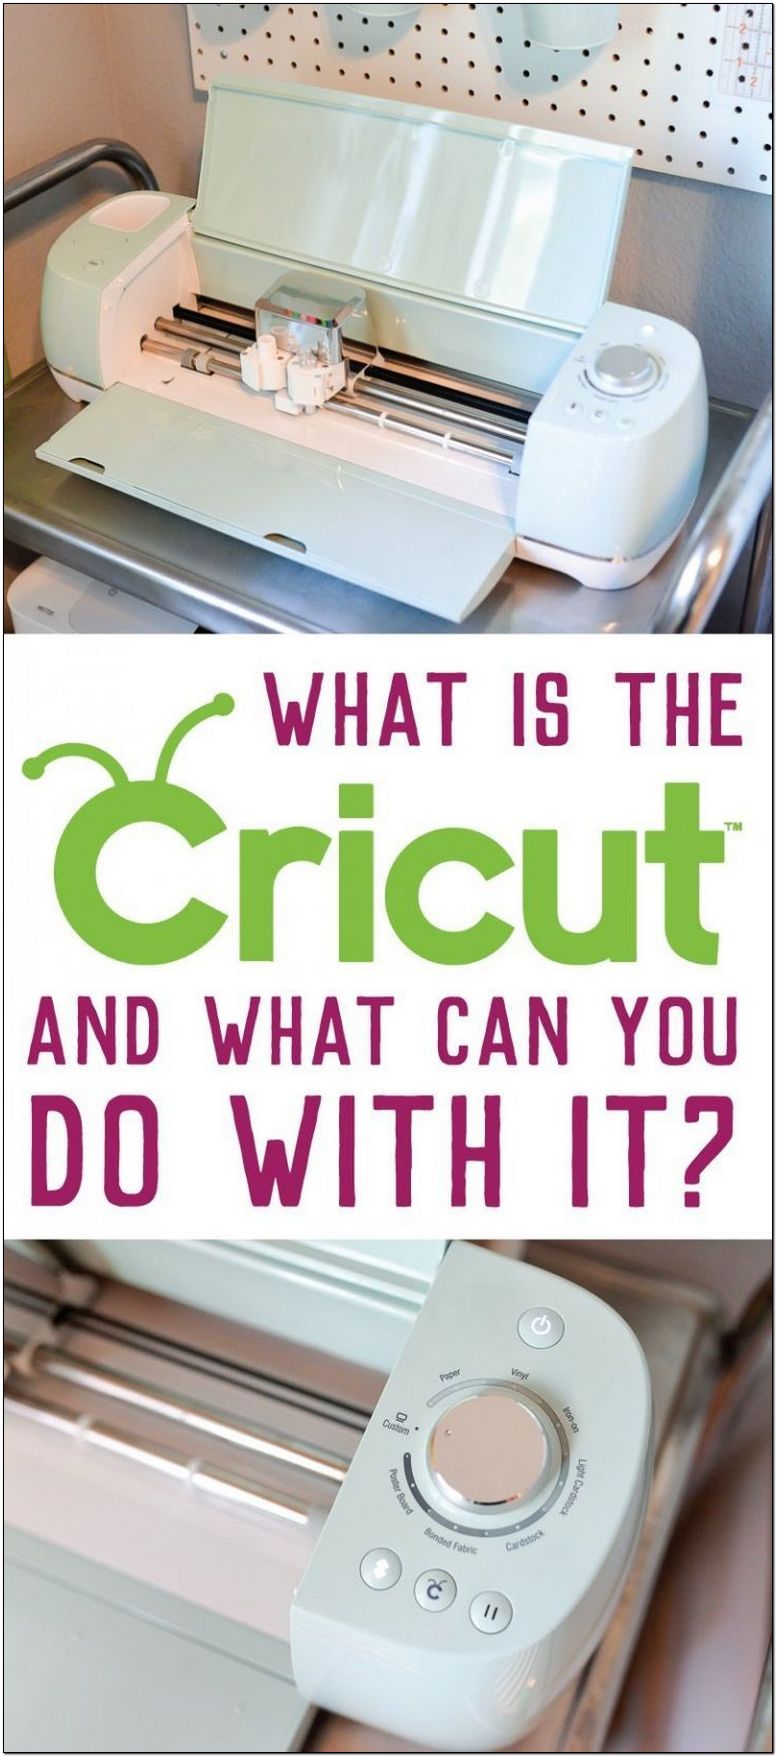 What Can You Do With A Cricut